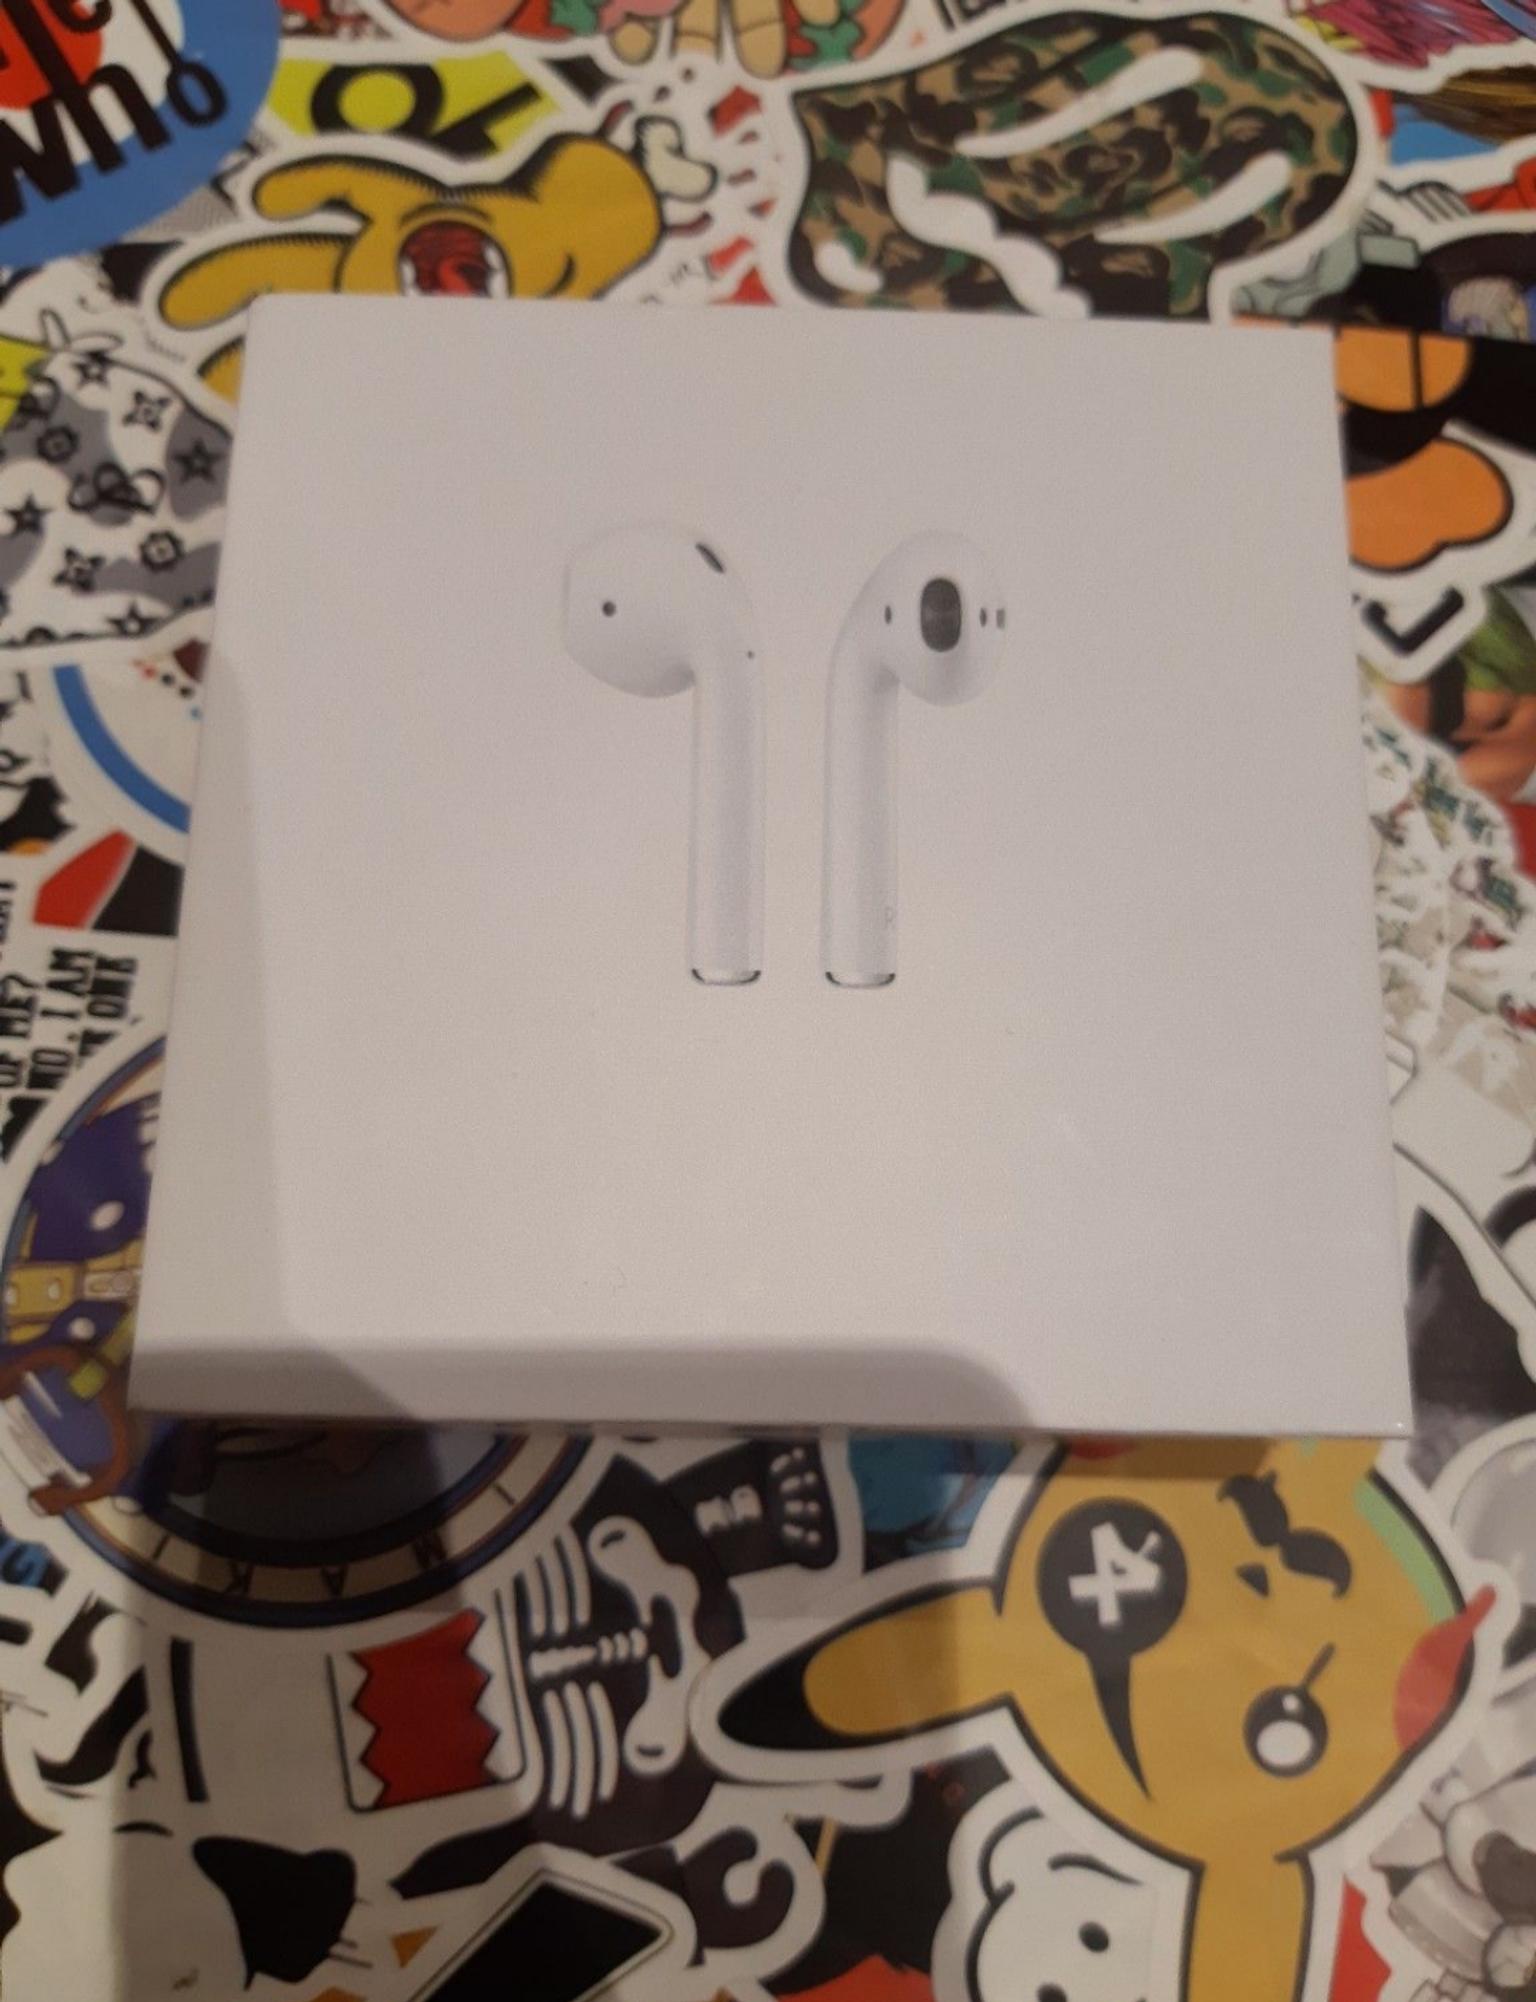 airpods in SW20 London for £80.00 for sale | Shpock